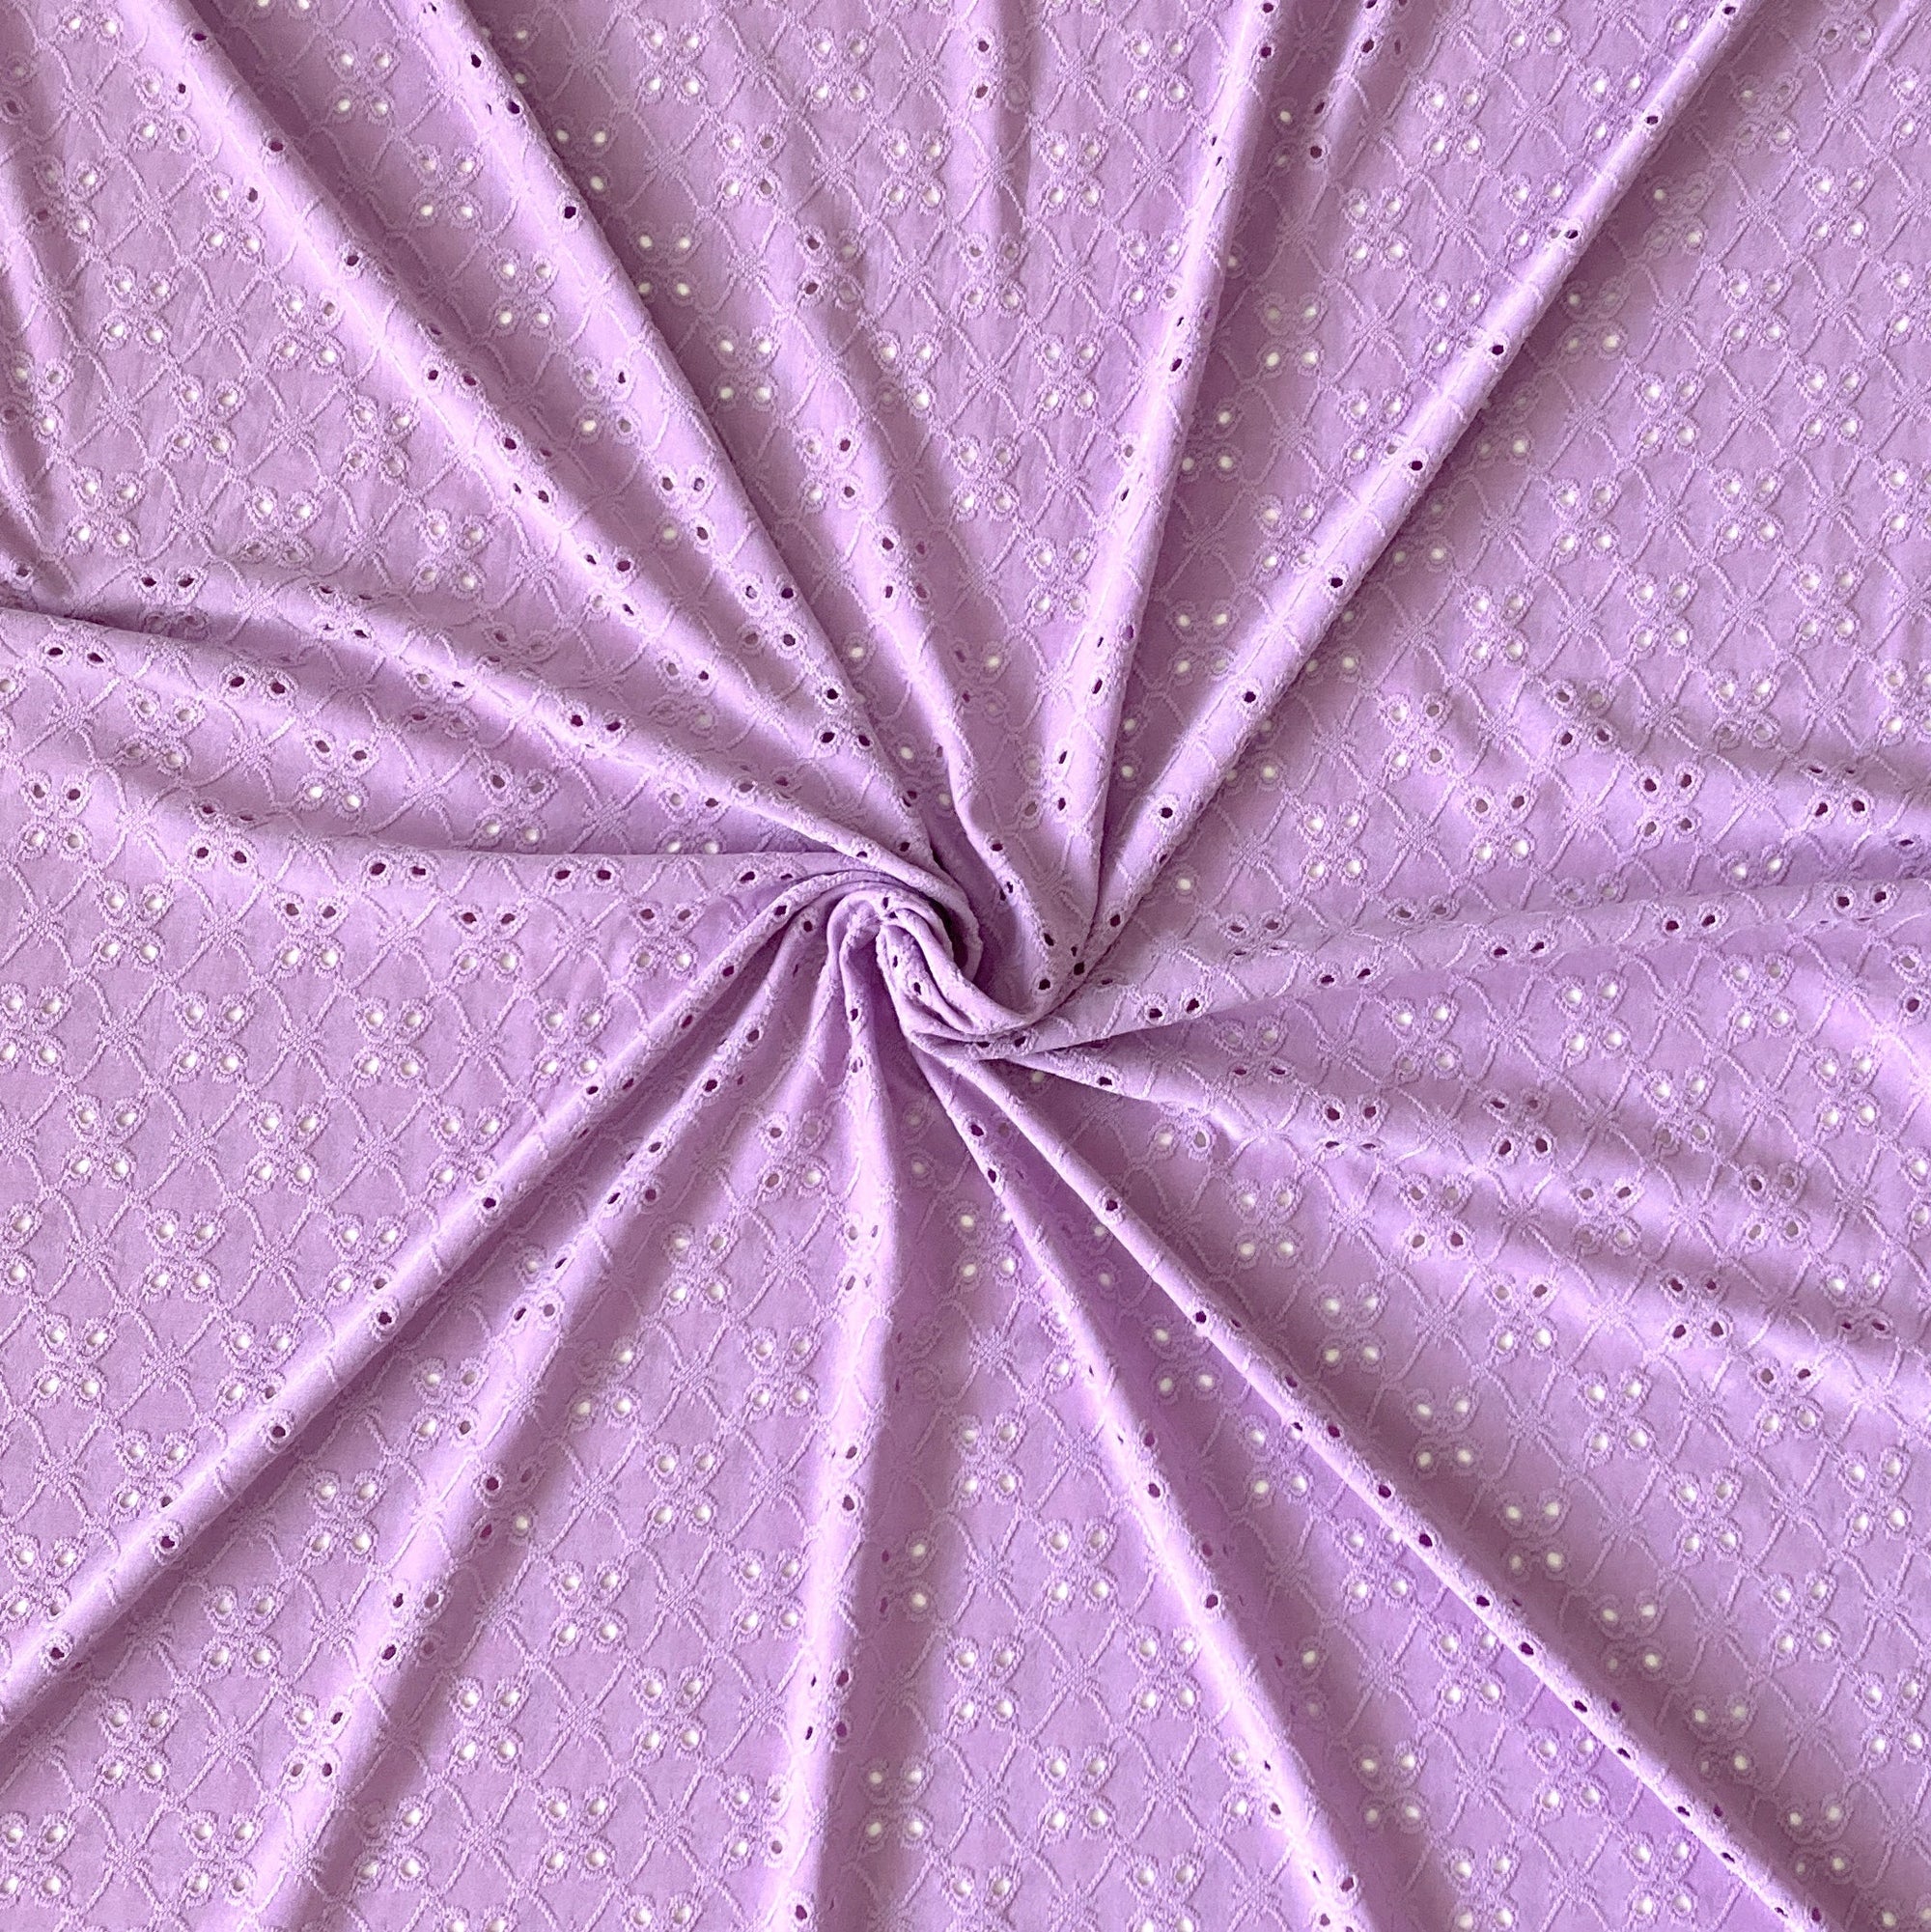 Solid Lilac Eyelet Poly Spandex Knit Fabric, Raspberry Creek Fabrics, watermarked, restored